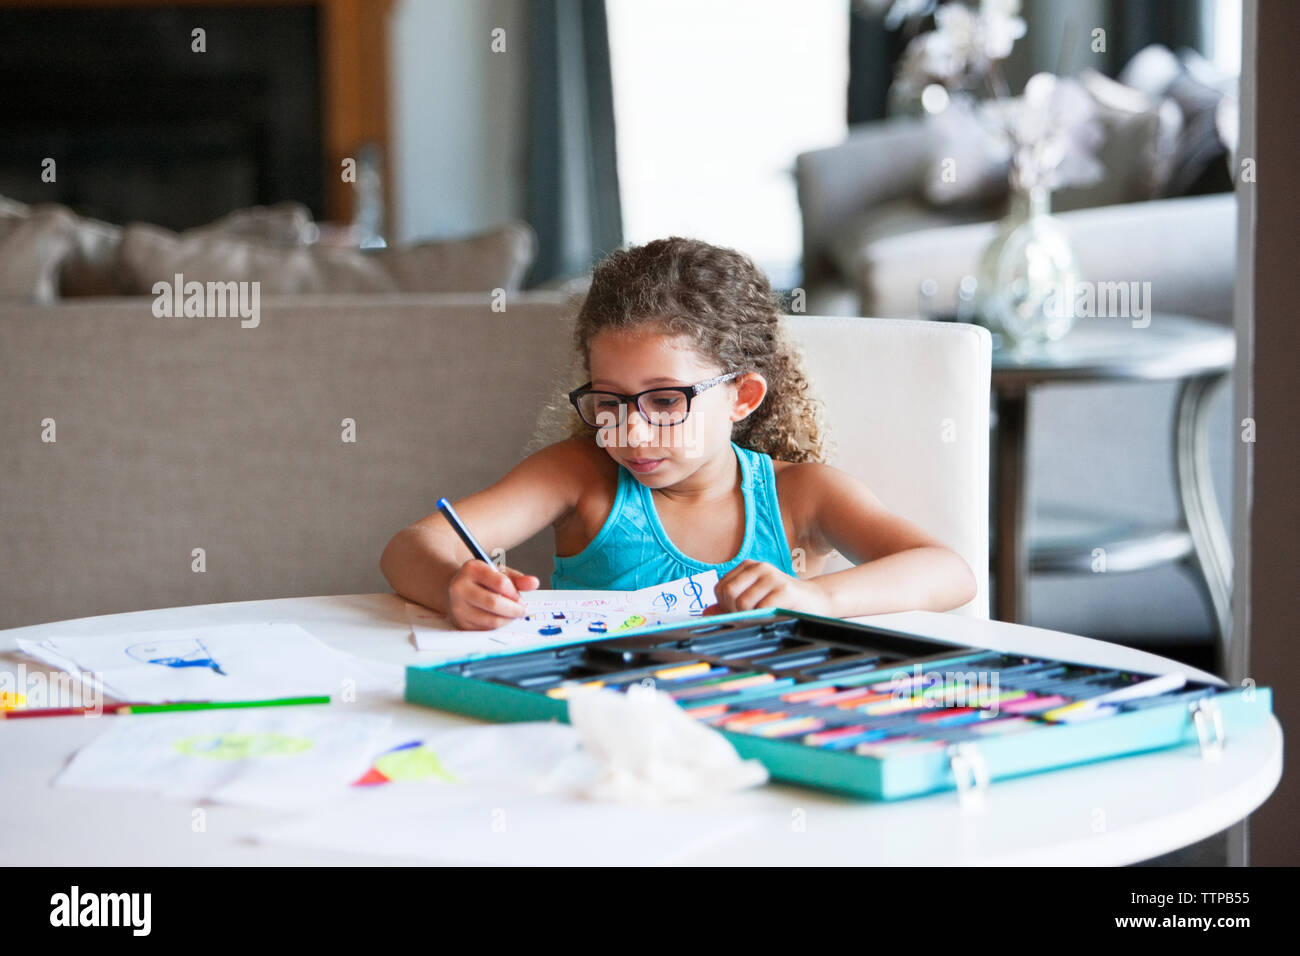 Girl coloring with felt tip pen on paper at table Stock Photo